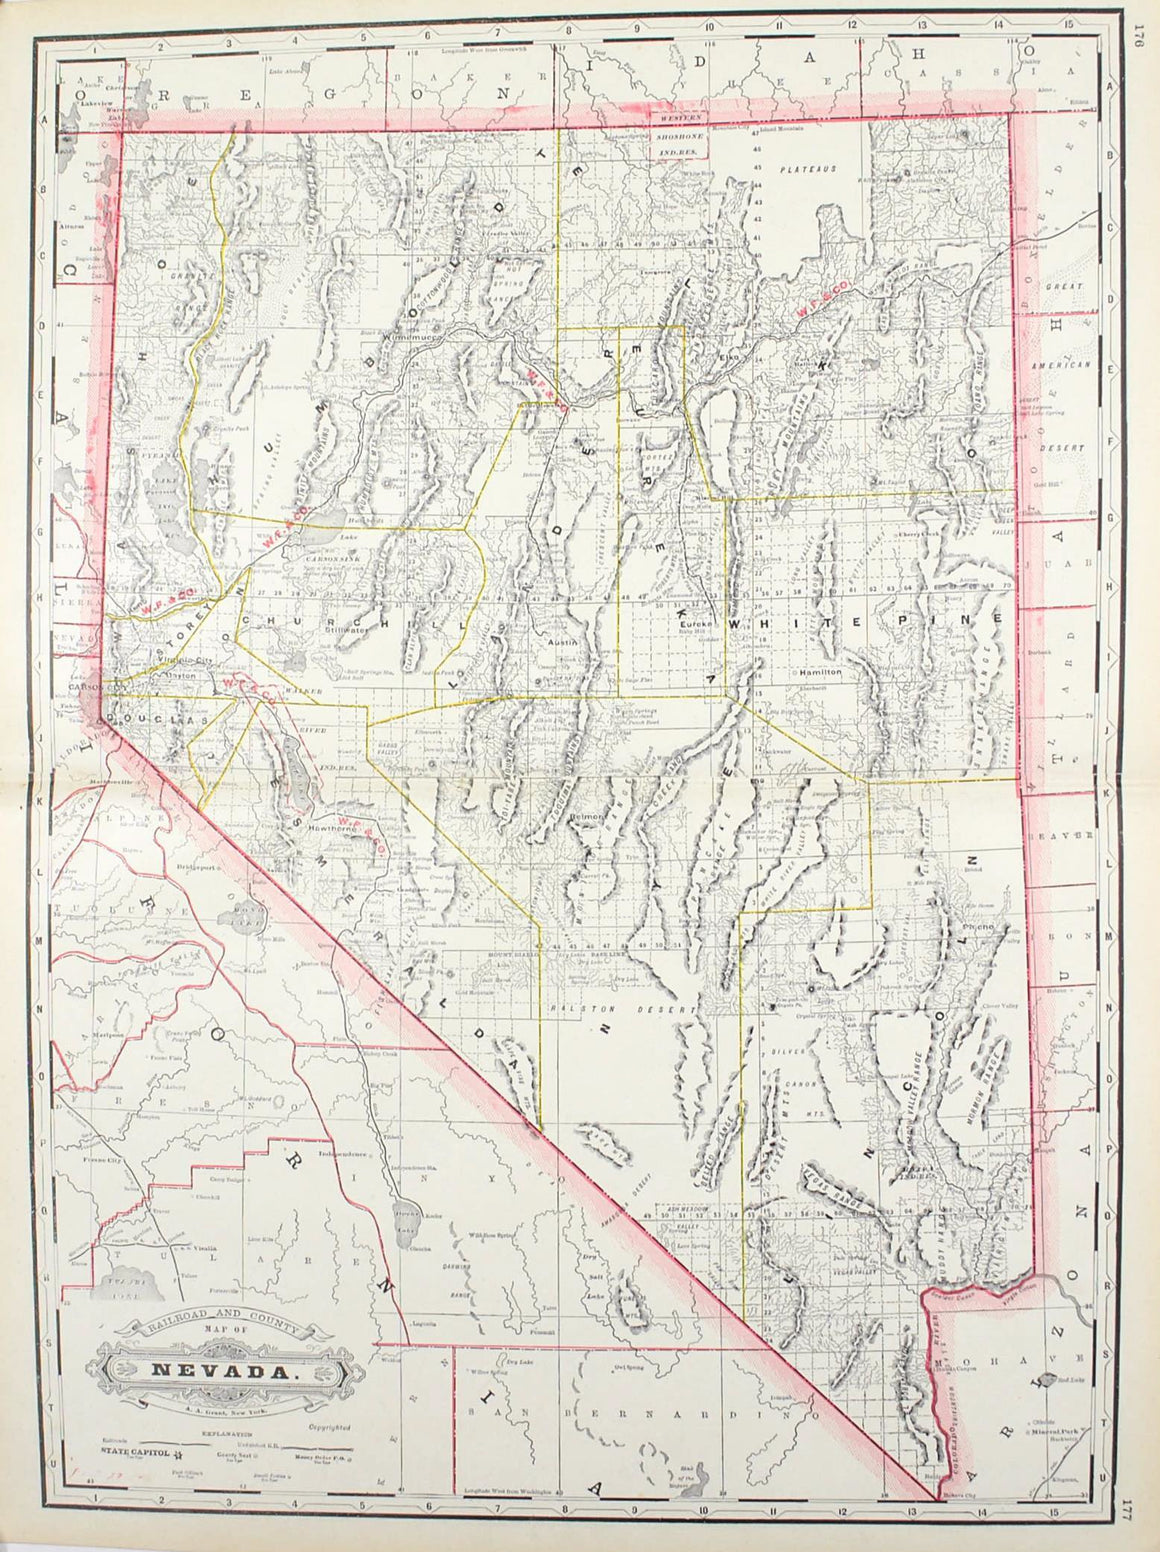 1887 Railroad and County Map of Nevada